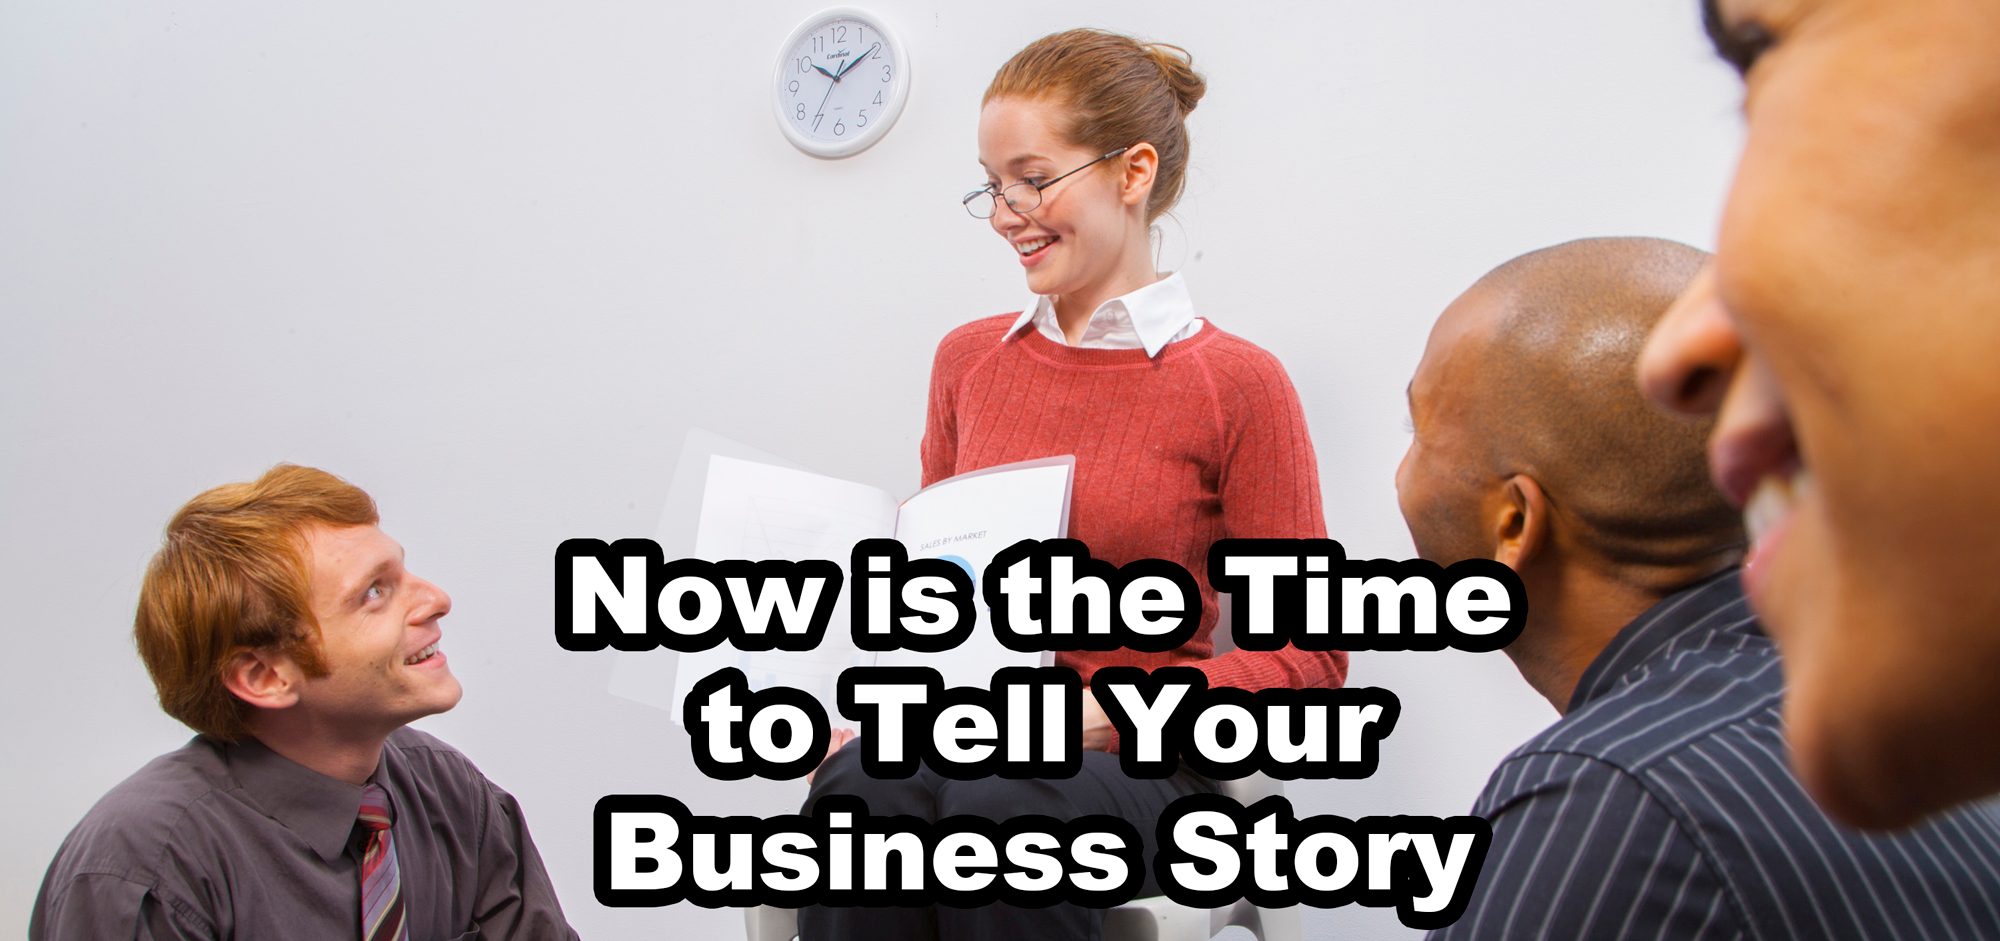 businesswoman reading to other businesspeople - text: Now is the Time to Tell Your Business Story